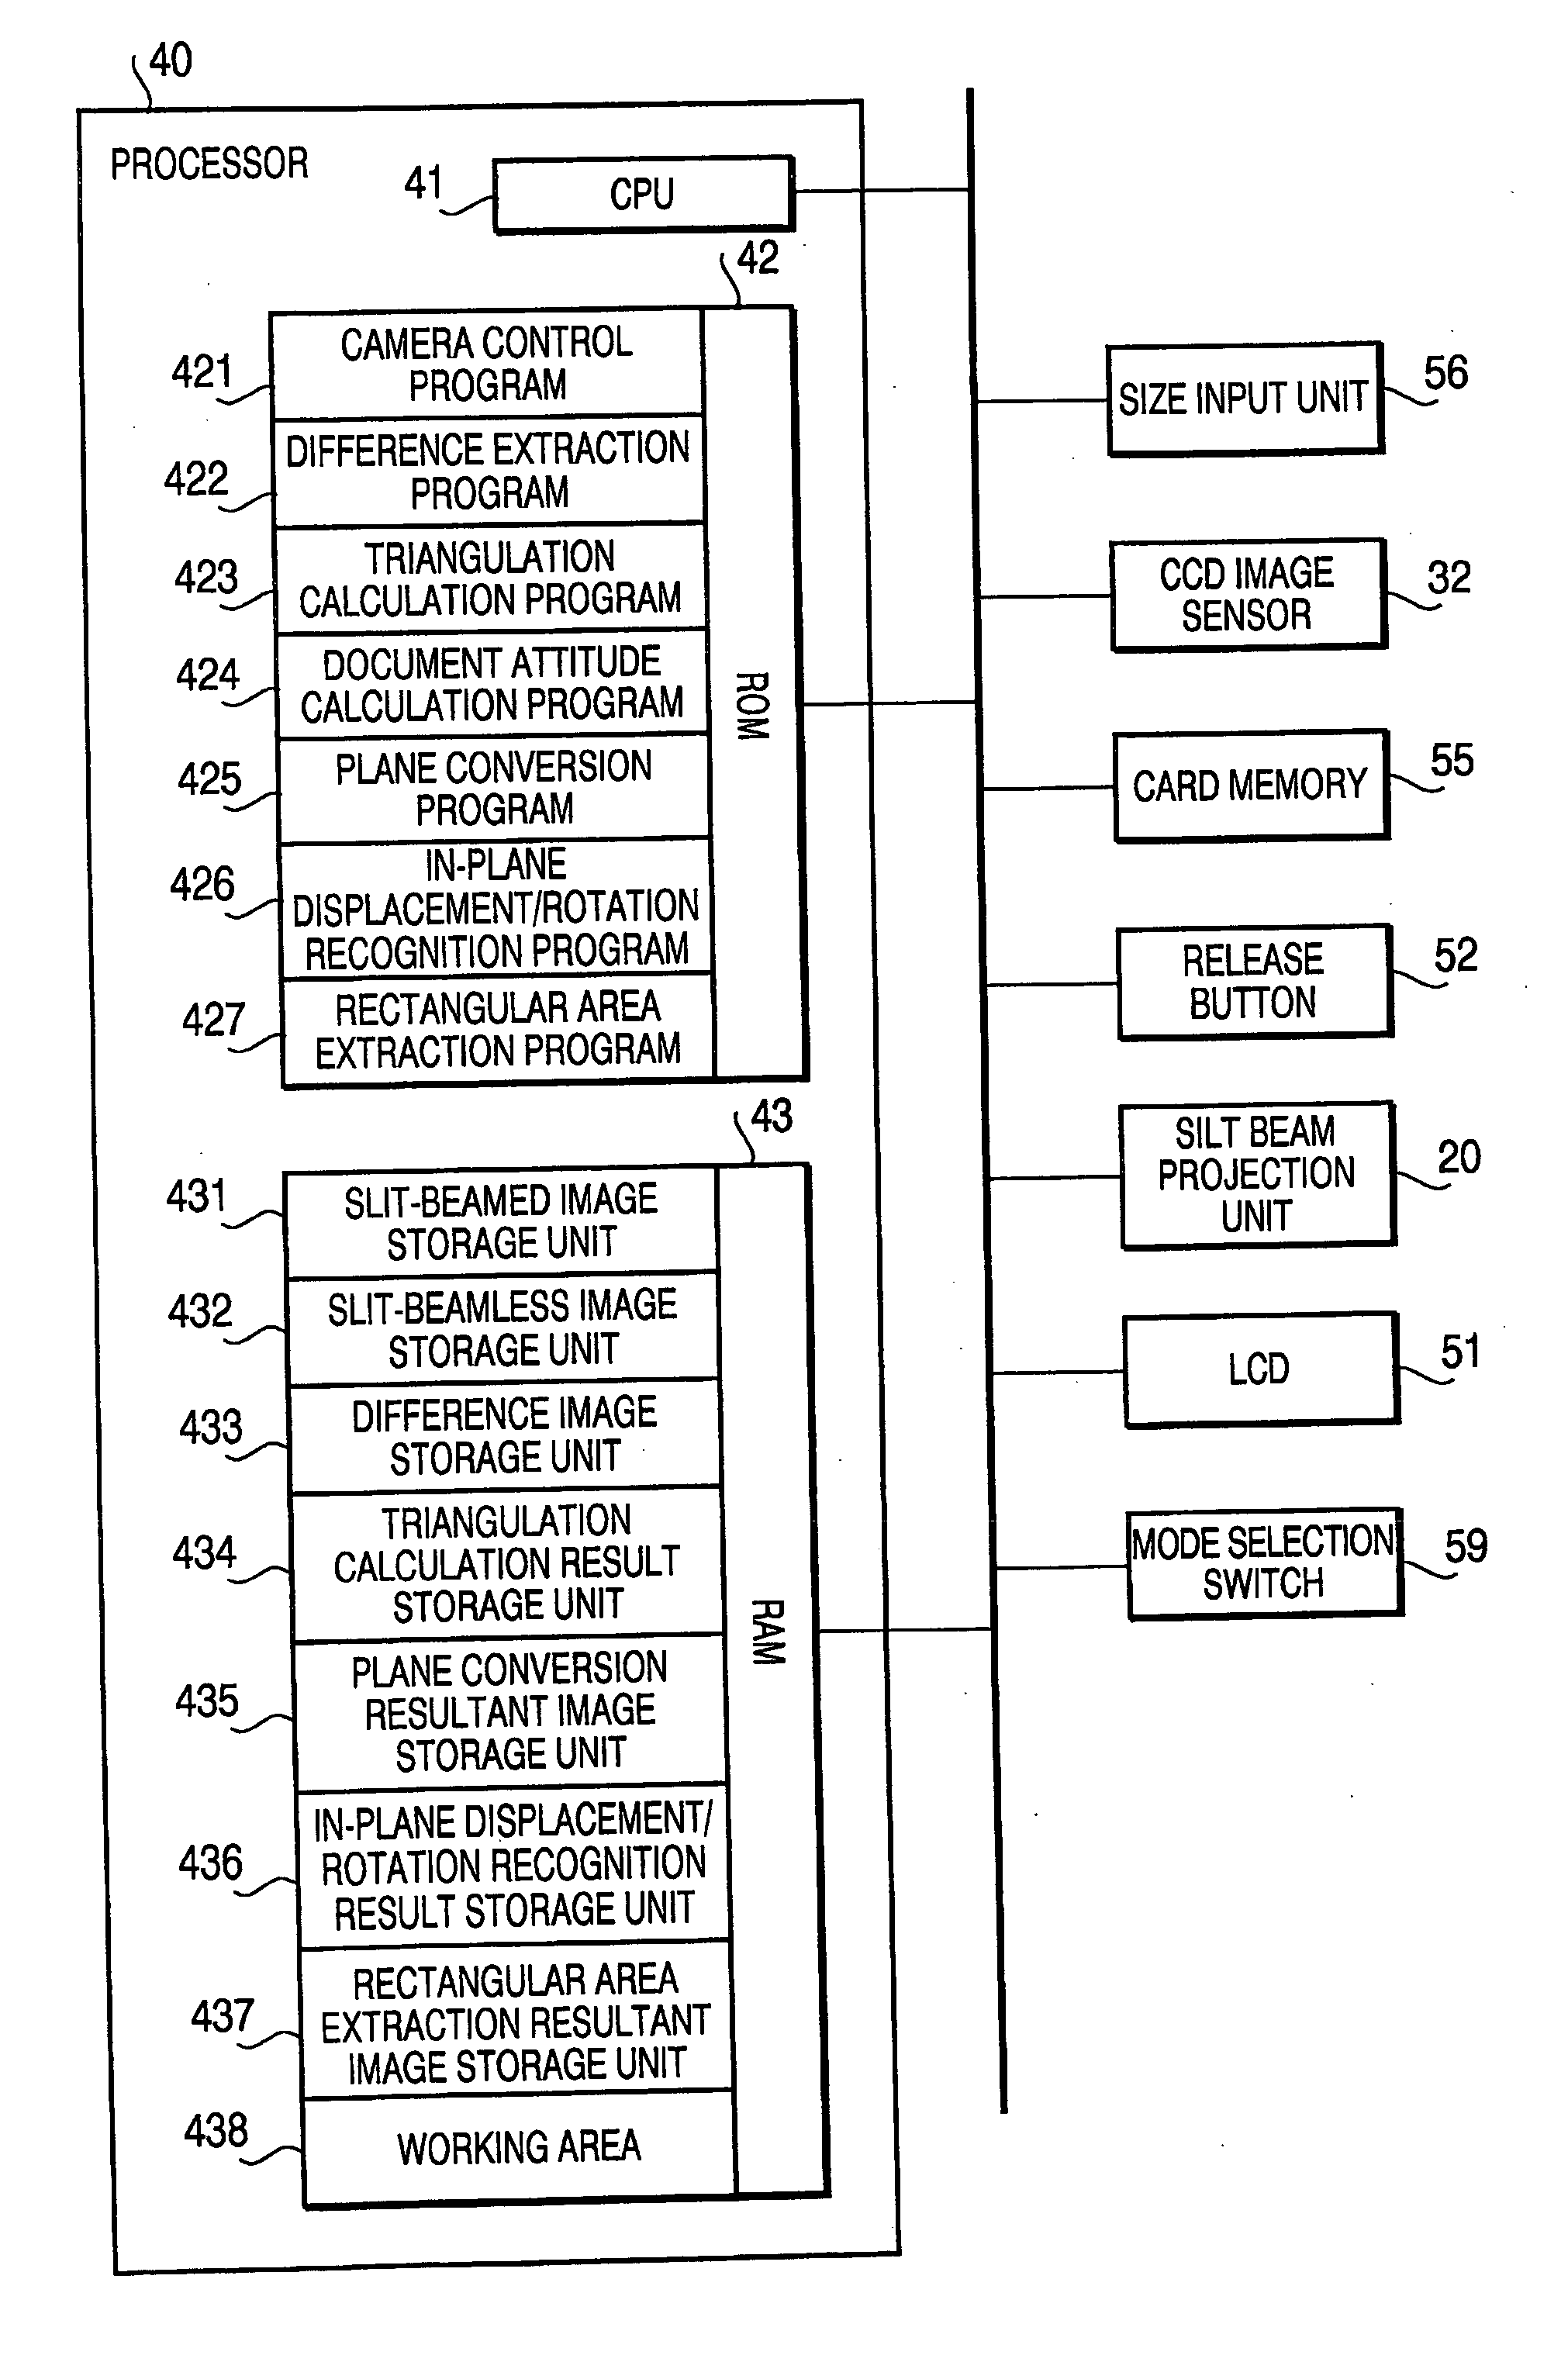 Image processing device and image capturing device